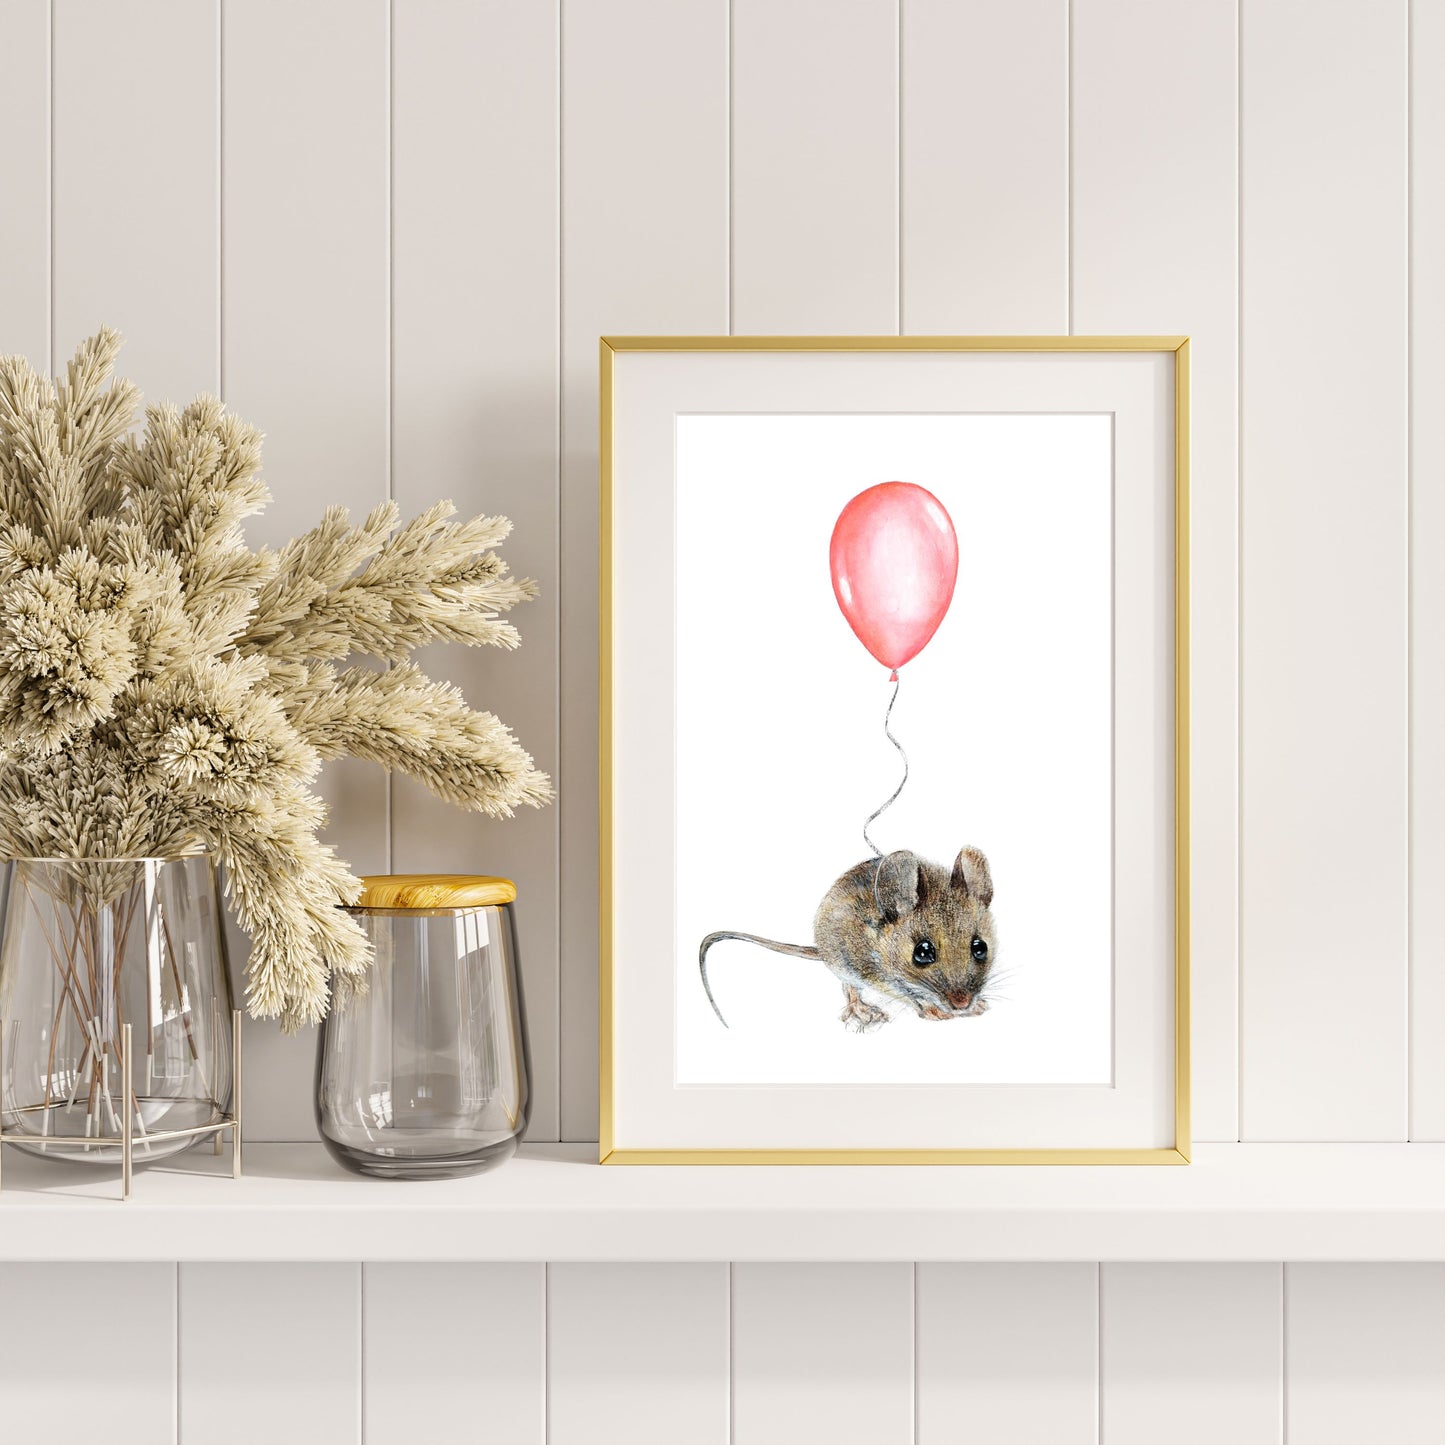 Mouse With Pink Balloon, Woodland nursery art, Giclee print on fine art paper